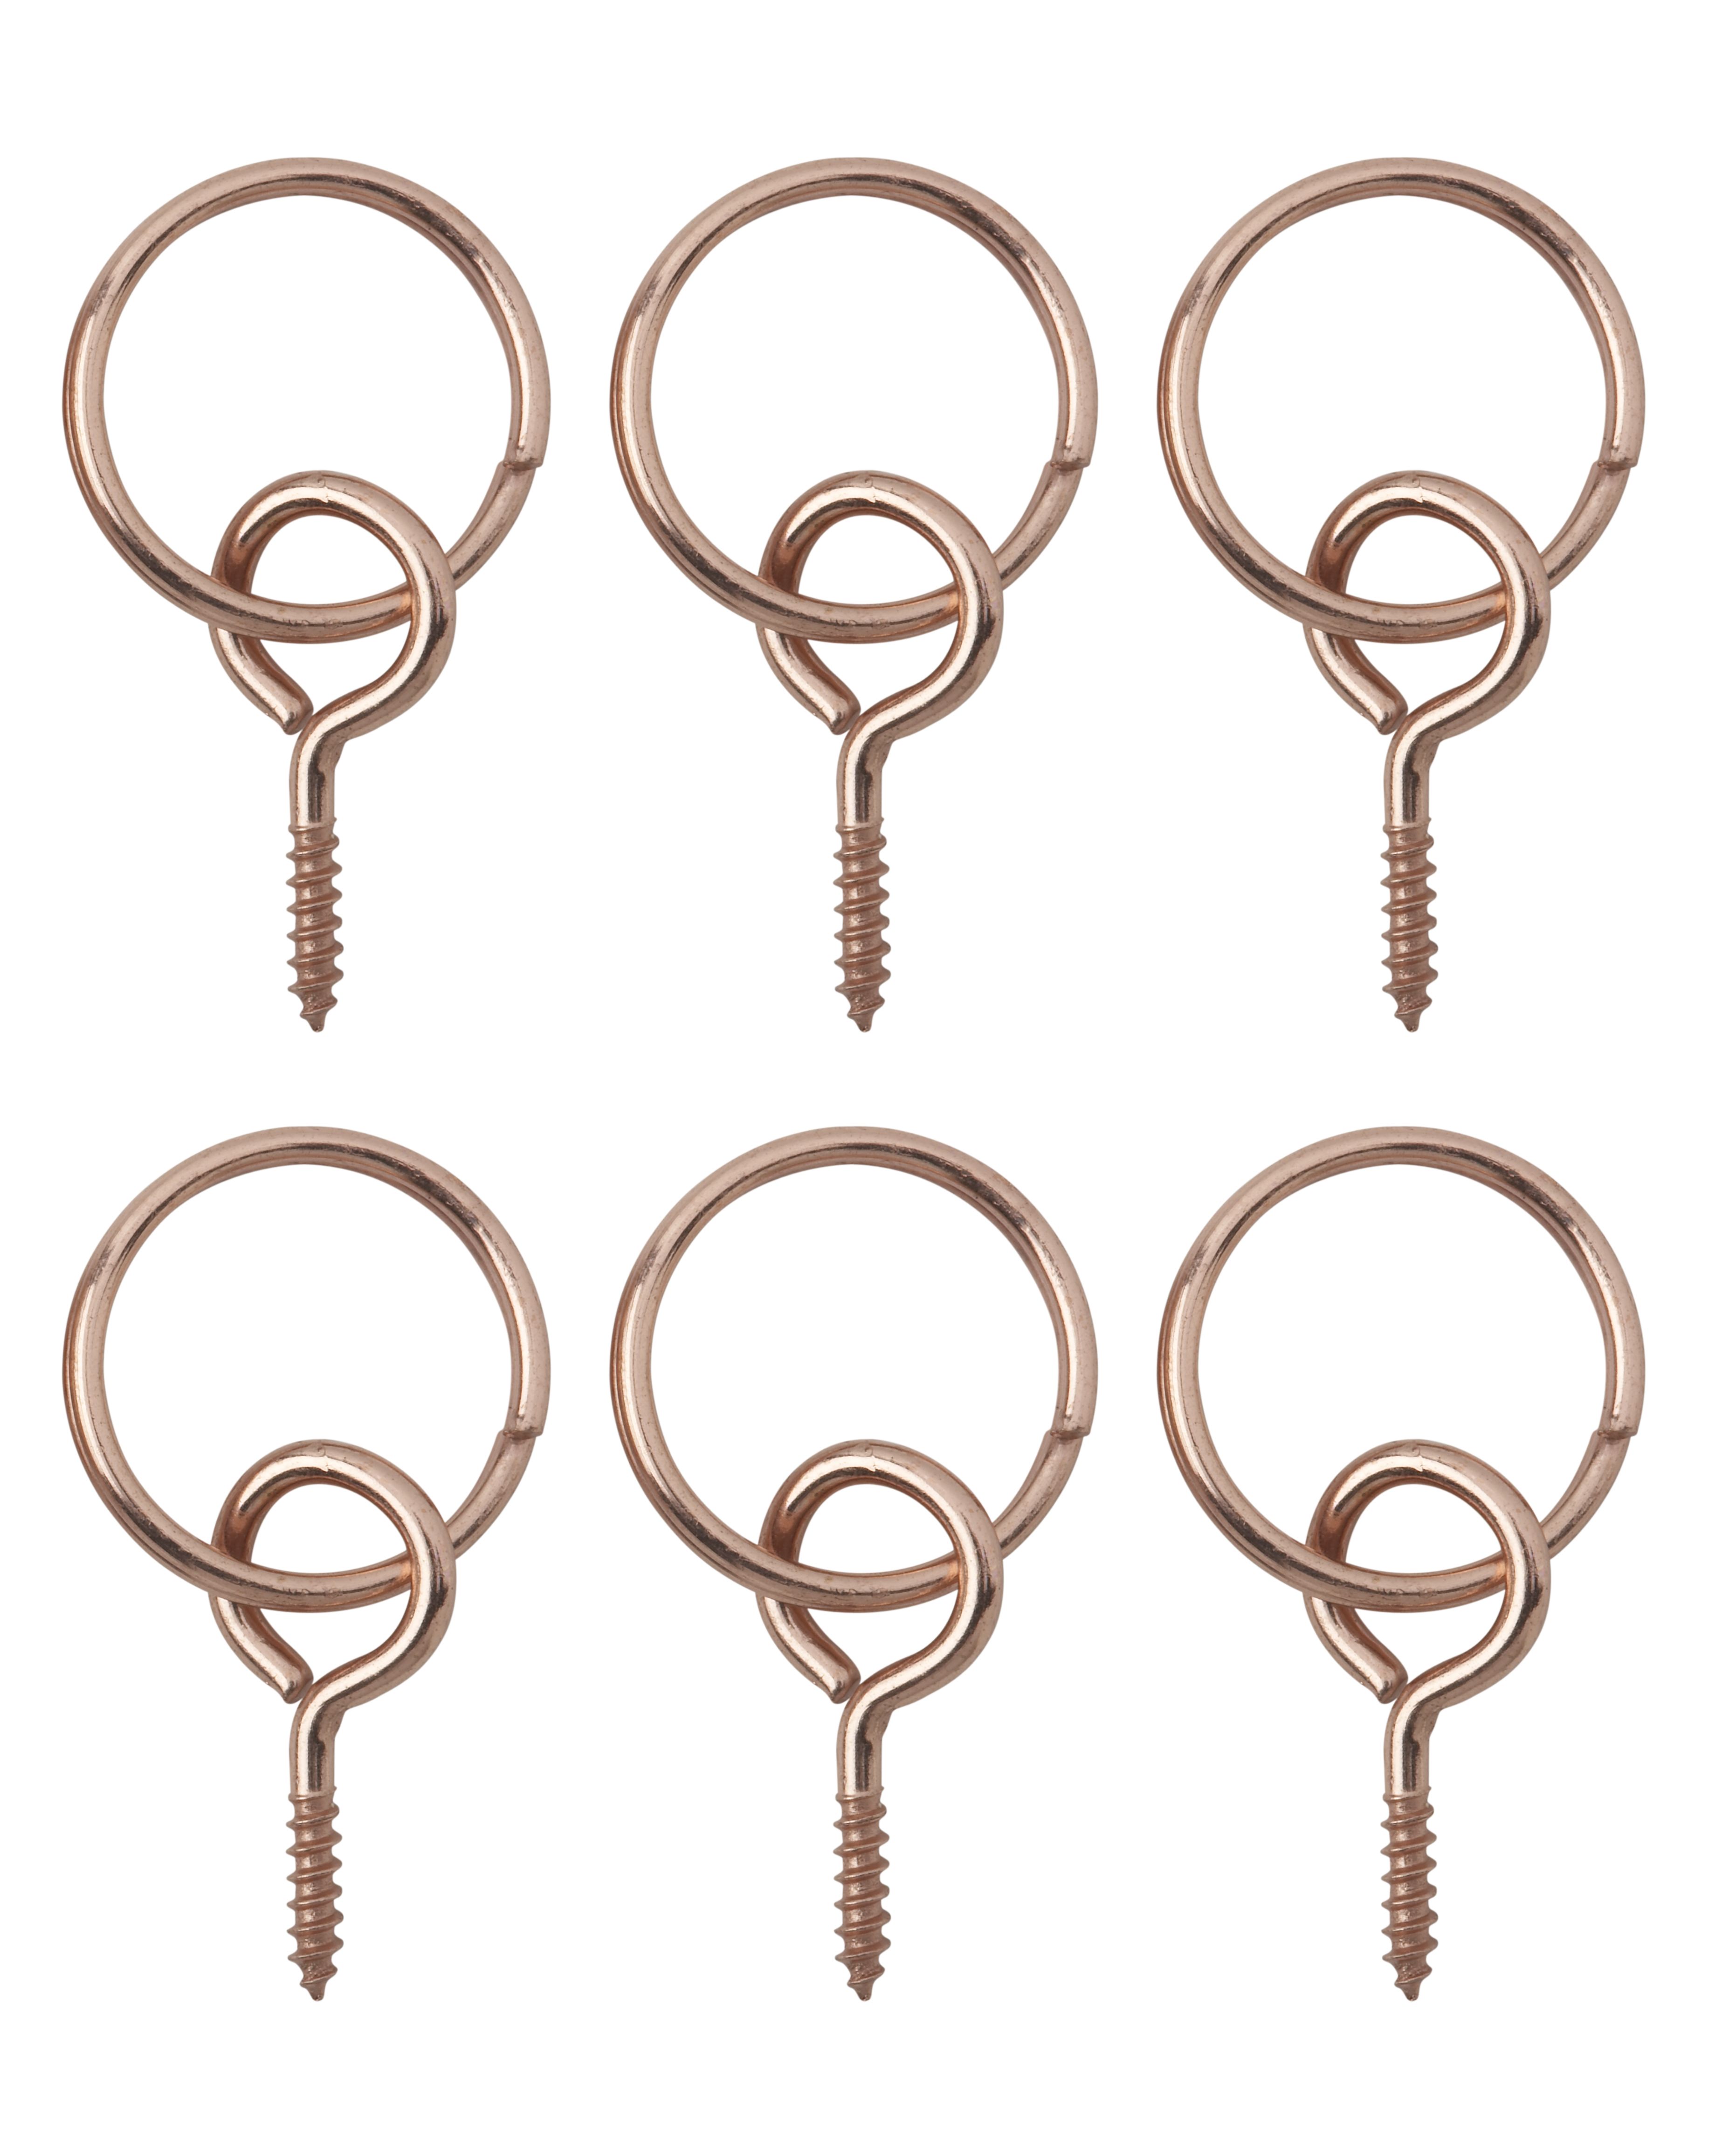 Copper effect Picture hook (W)9mm, Pack of 6